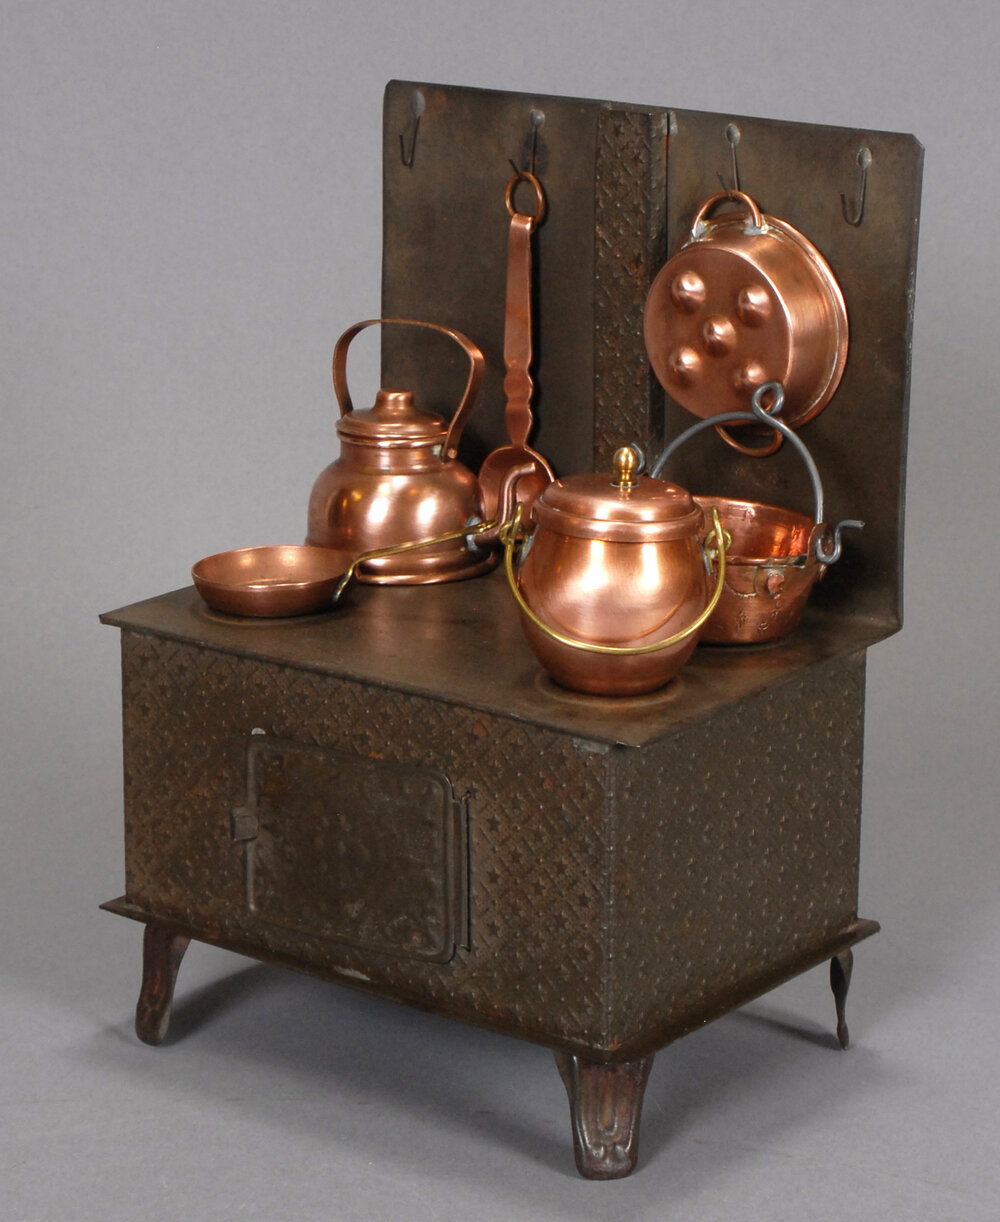 German Stove with Copper Cookware — Carmel Doll Shop